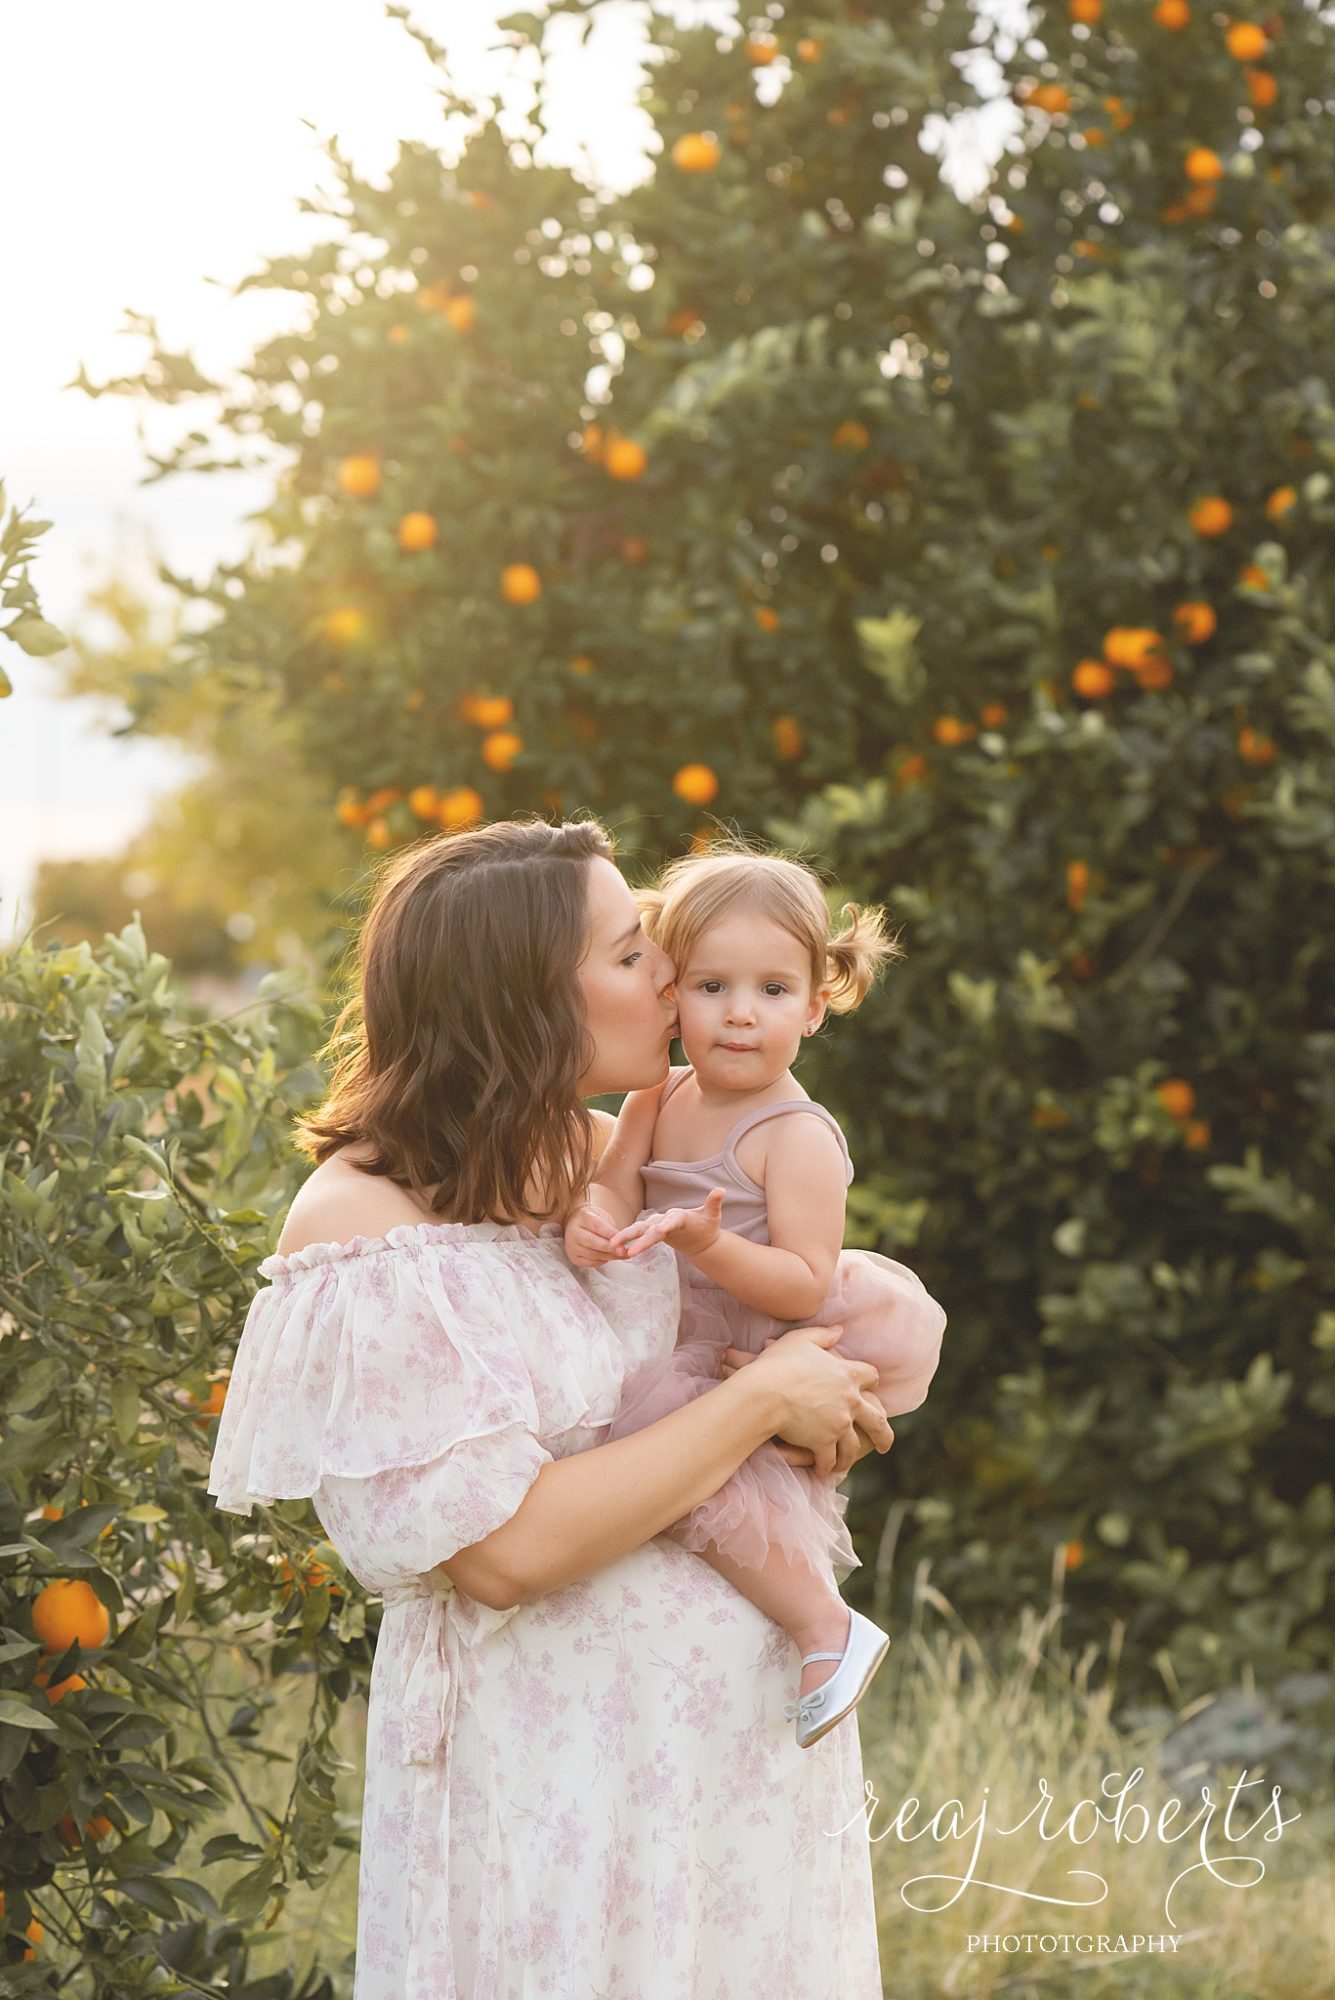 Scottsdale maternity photographer pregnancy photos inside orange grove with momma and daughter